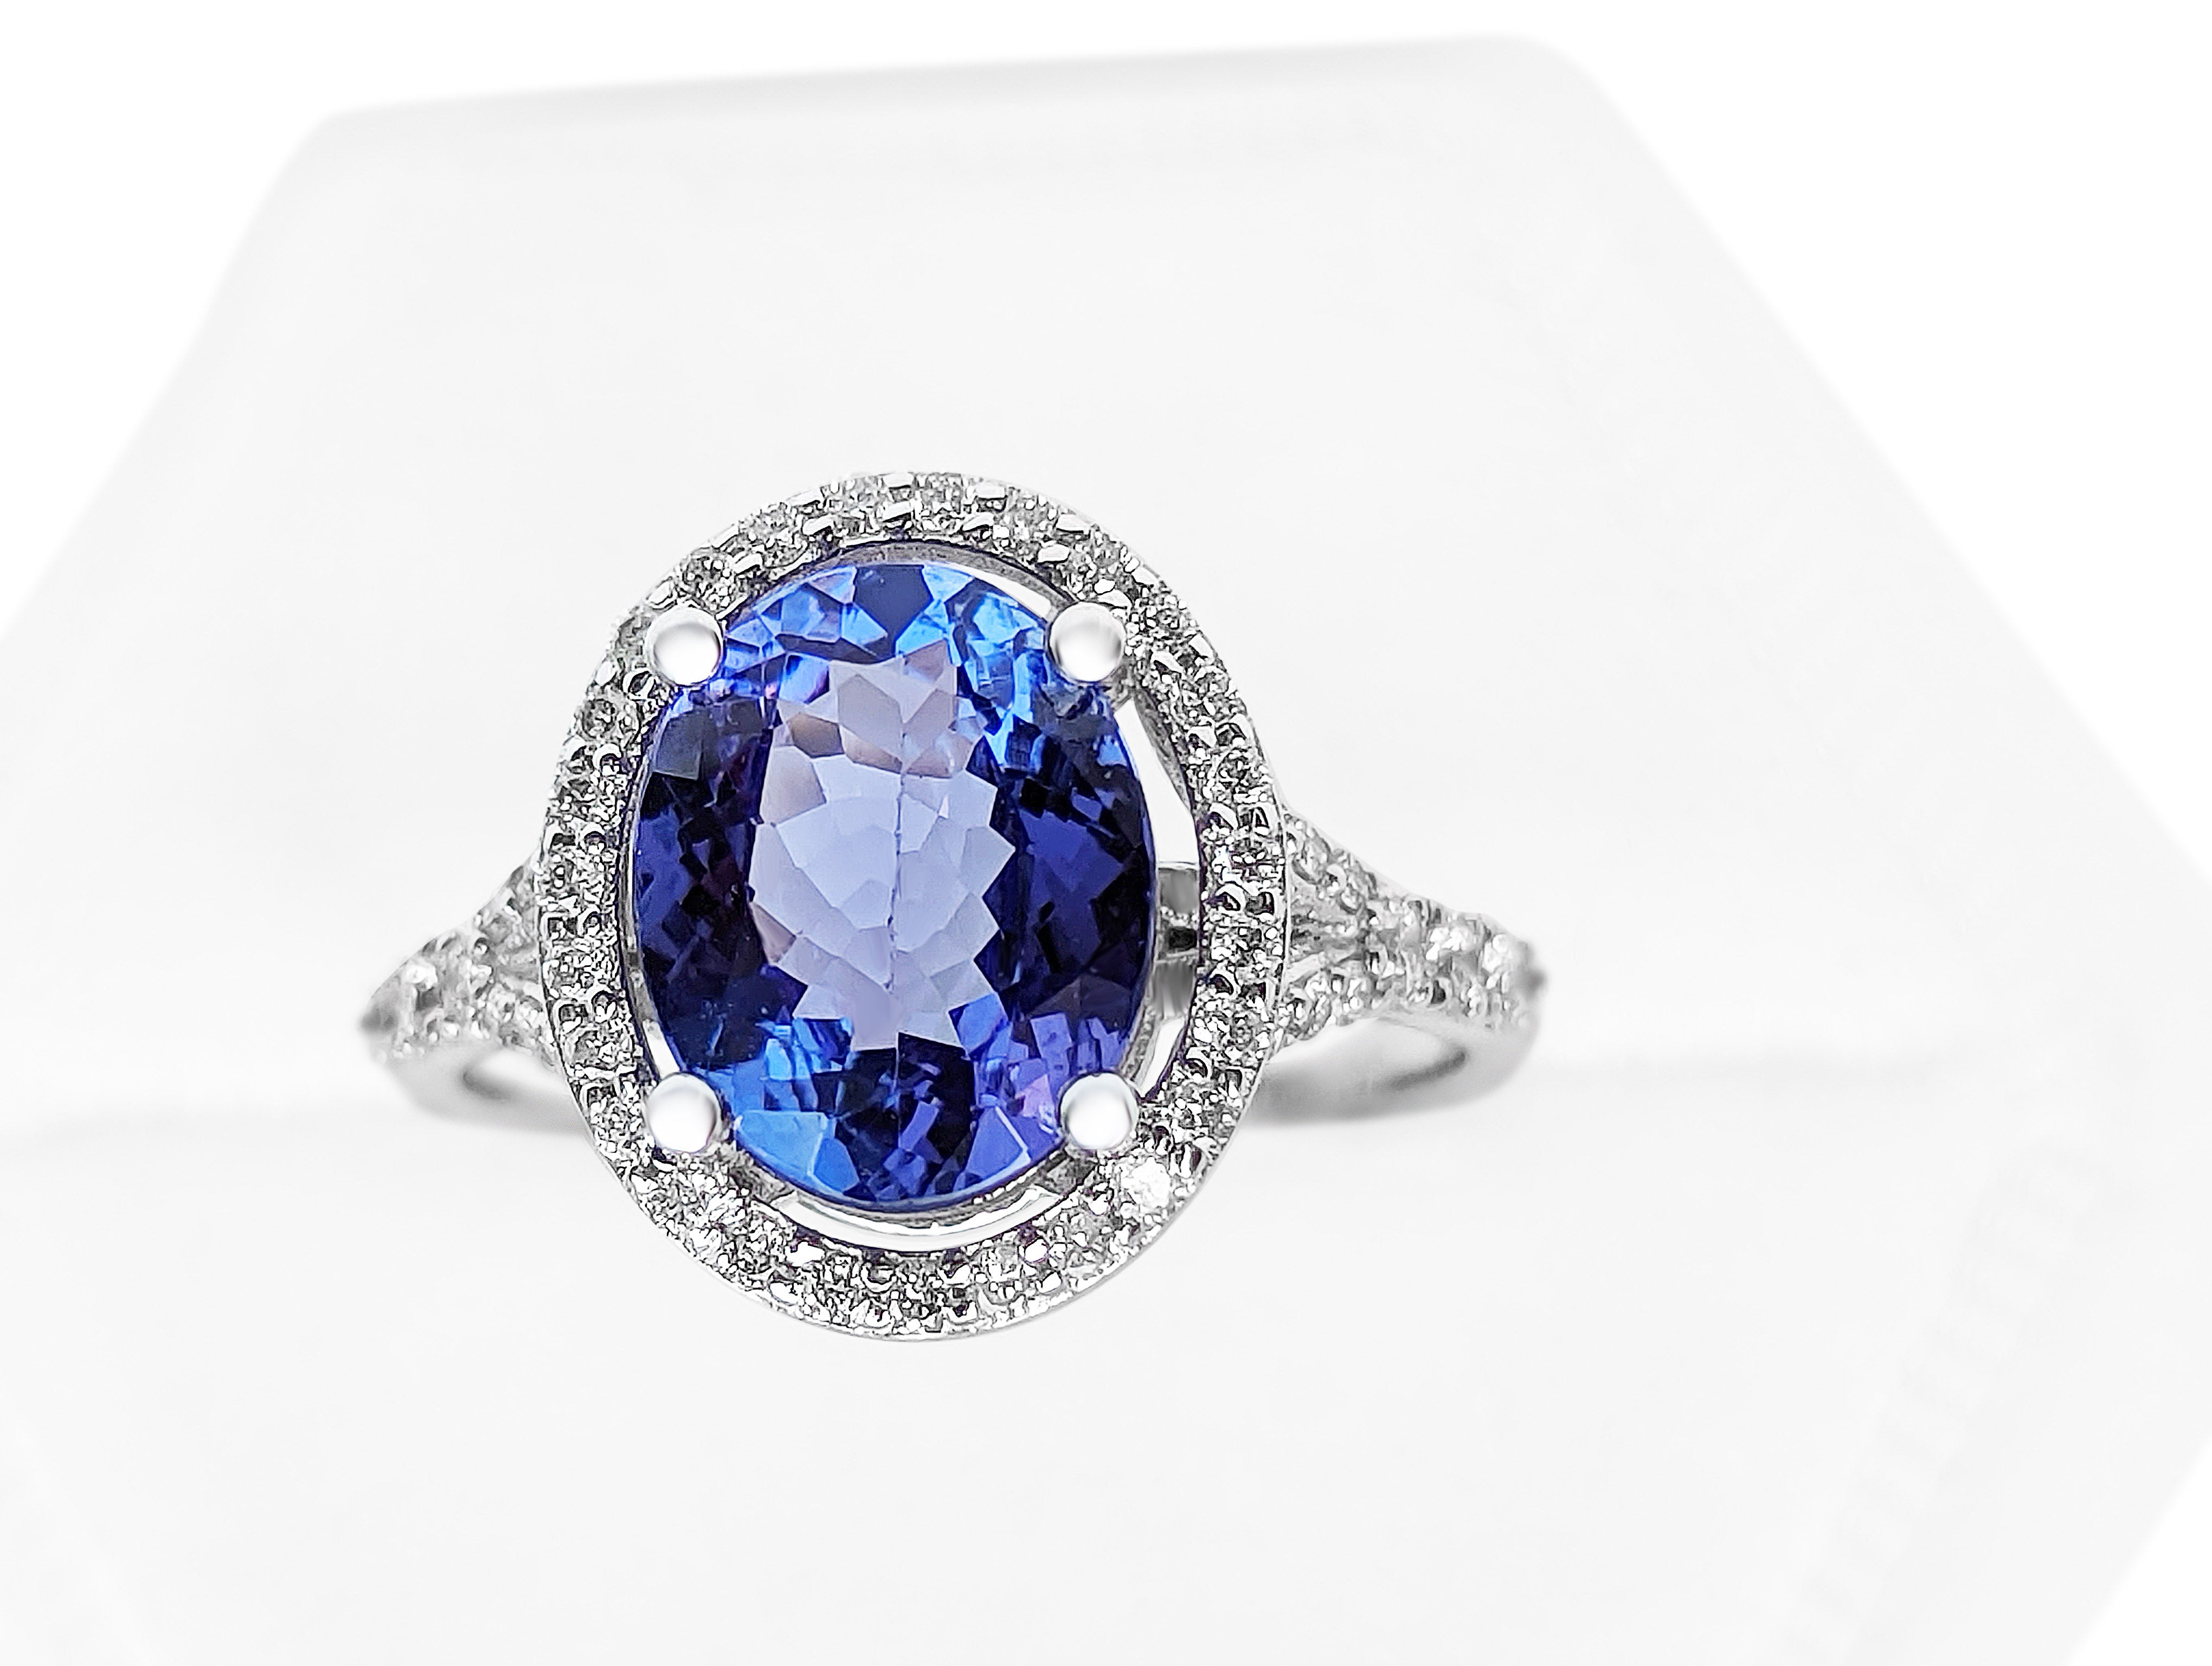 Tanzanite is an extremely rare gemstone, found in a single location in the world, at the foothills of mount Kilimanjaro in Tanzania. As this single source is expected to drain out in 20 years from now, Tanzanite is a perfect gem for investment as